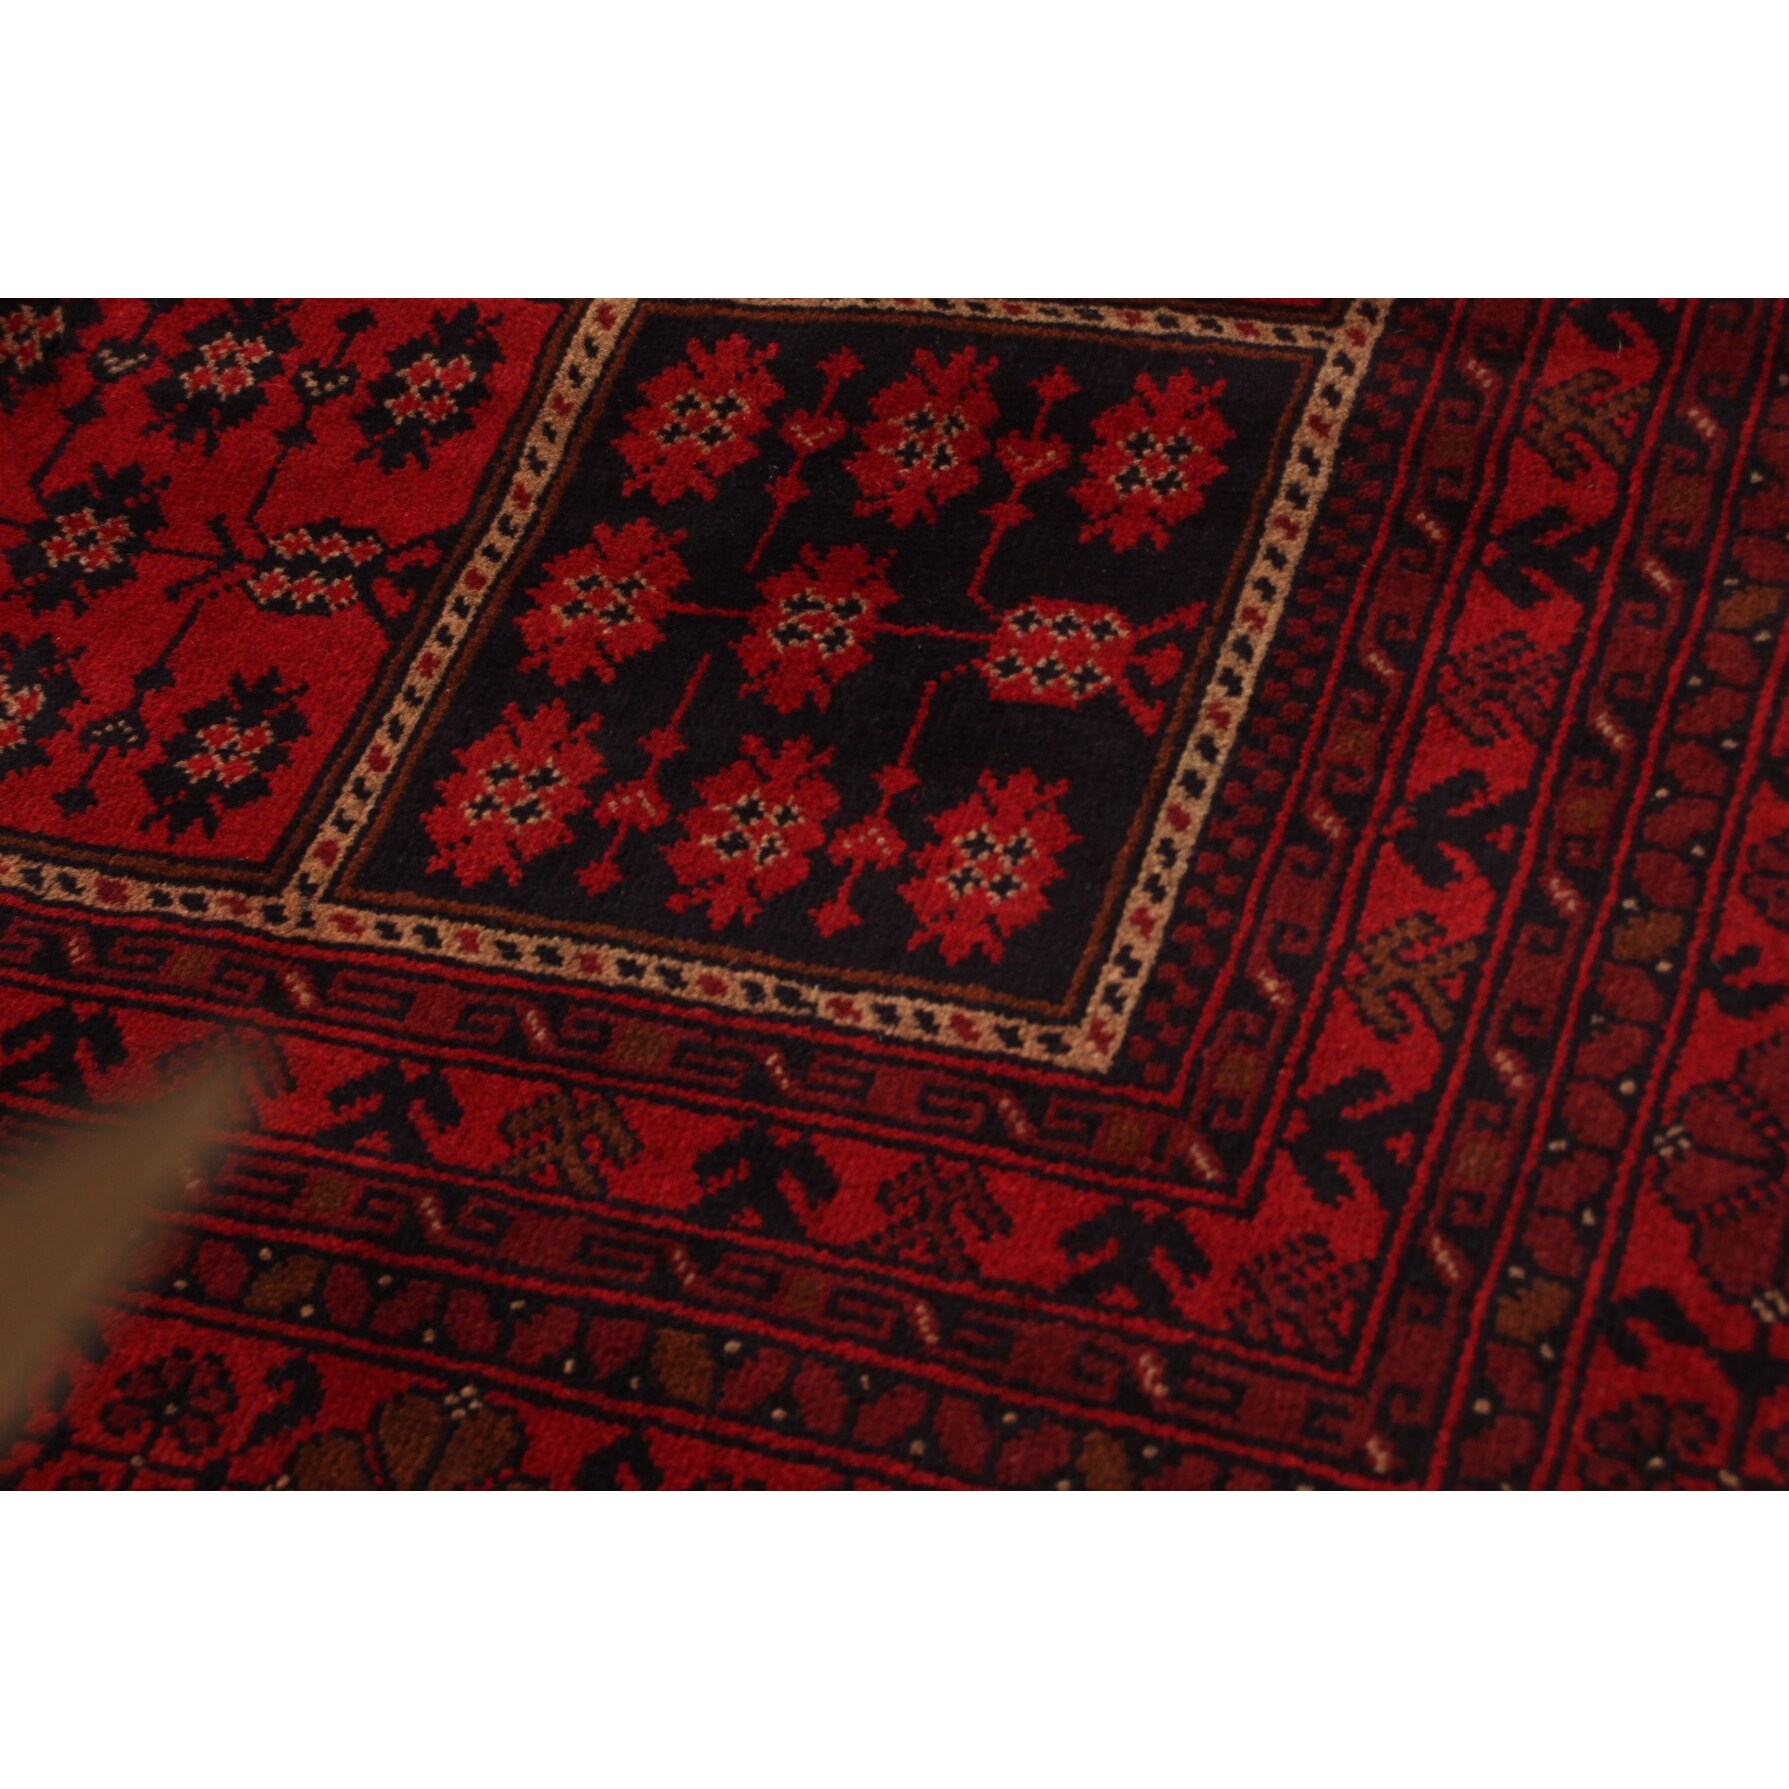 Finest Khal Mohammadi Bordered Red Rug 6'9 x 9'5 Bedroom eCarpet Gallery Large Area Rug for Living Room 357007 Hand-Knotted Wool Rug 